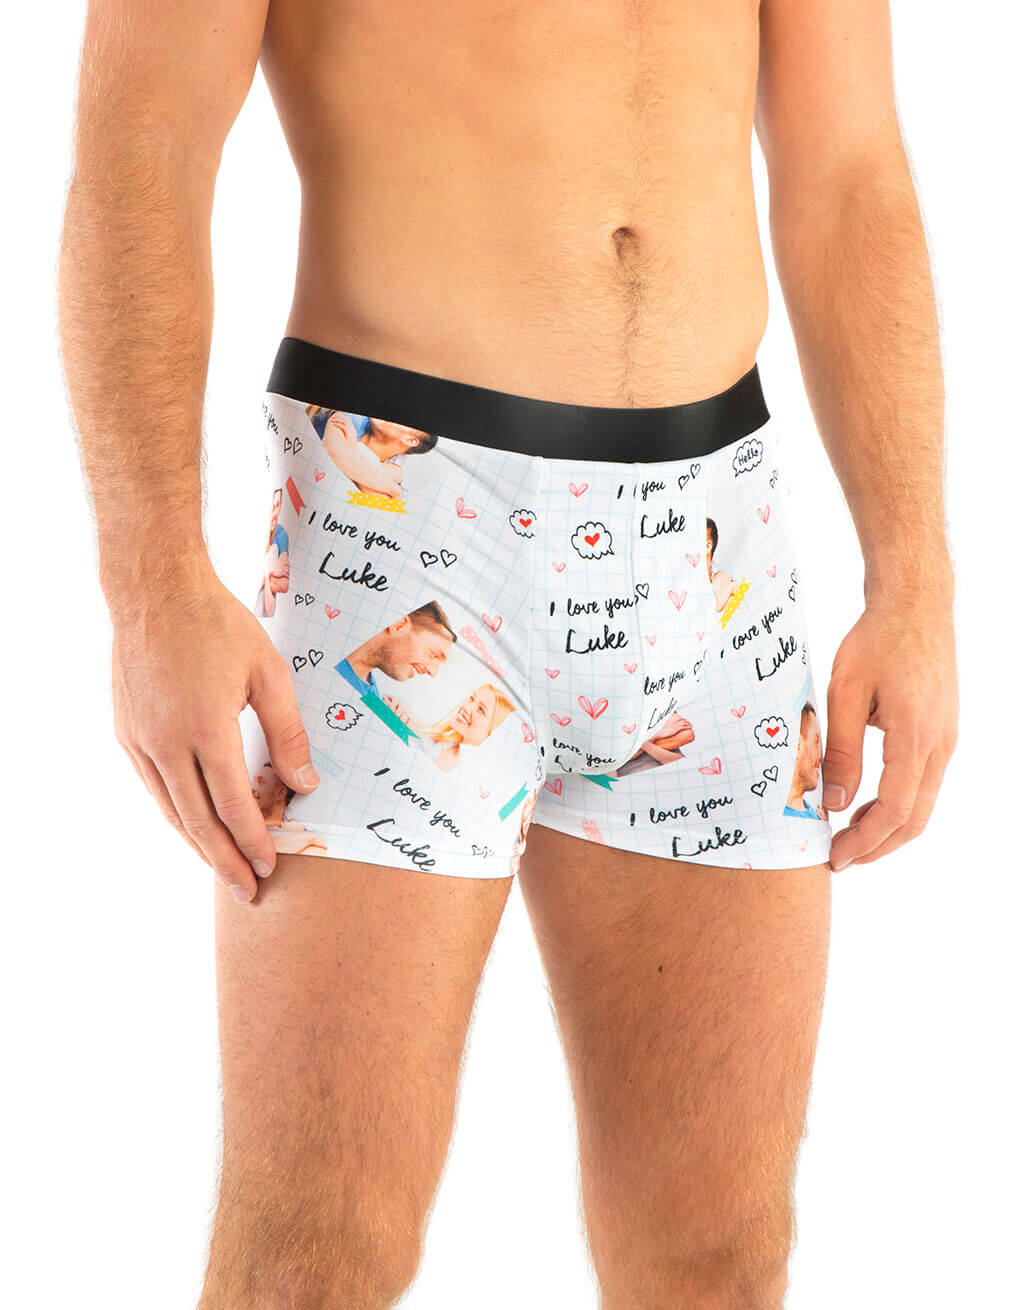 I Love you Boxers - Personalised Valentines Boxer Shorts – Super Socks